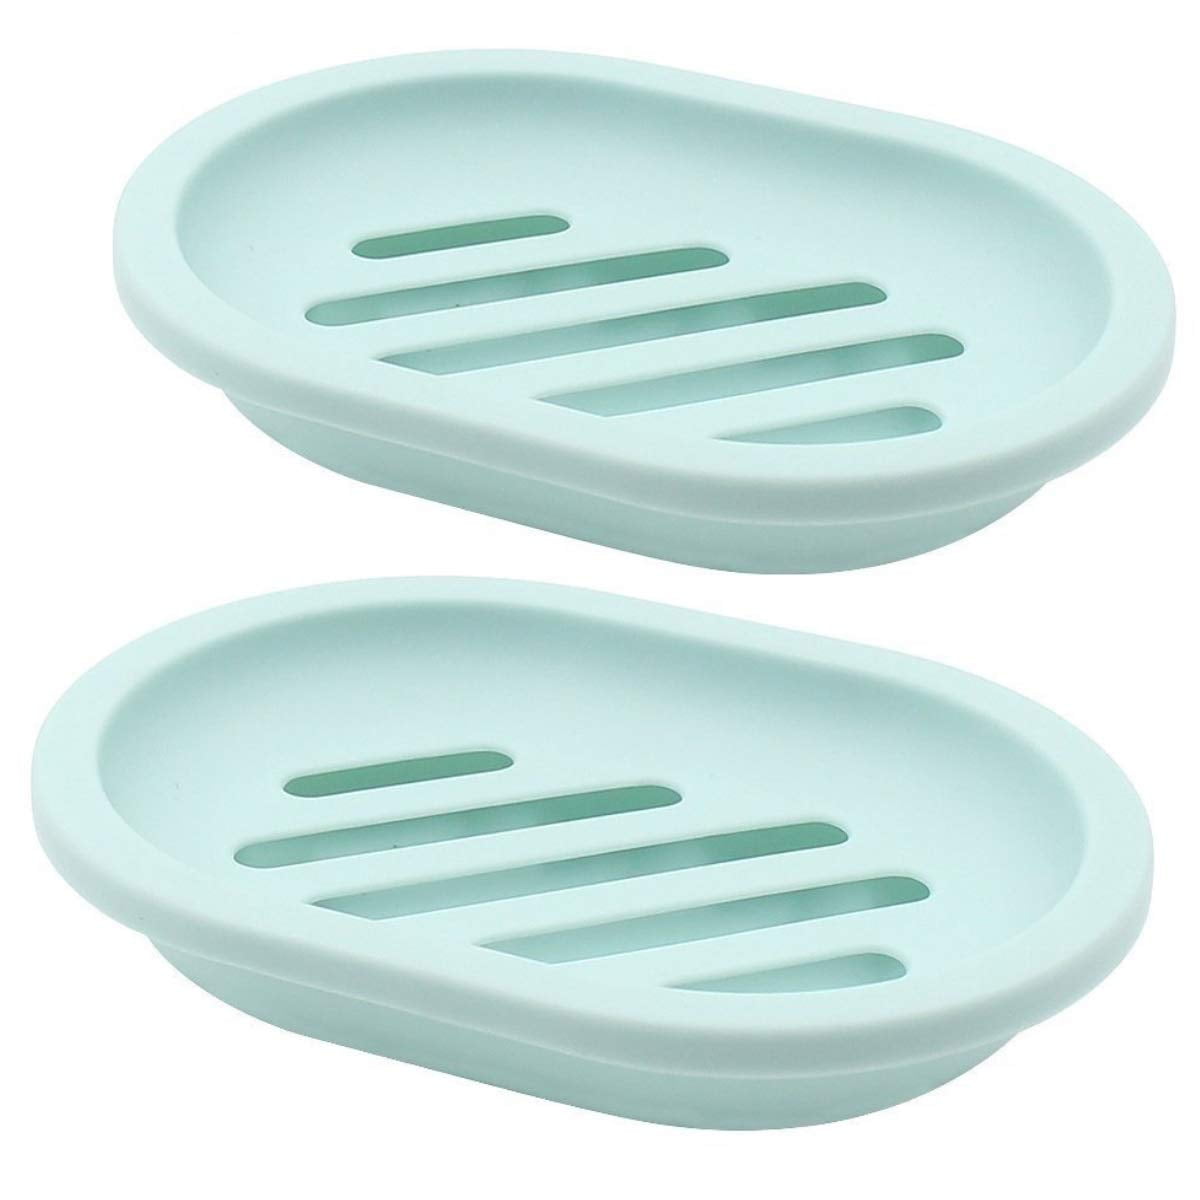 Soap Holder 2-Pack Soap Dish With DrainHolder Easy Cleaning Dry, Soap Saver